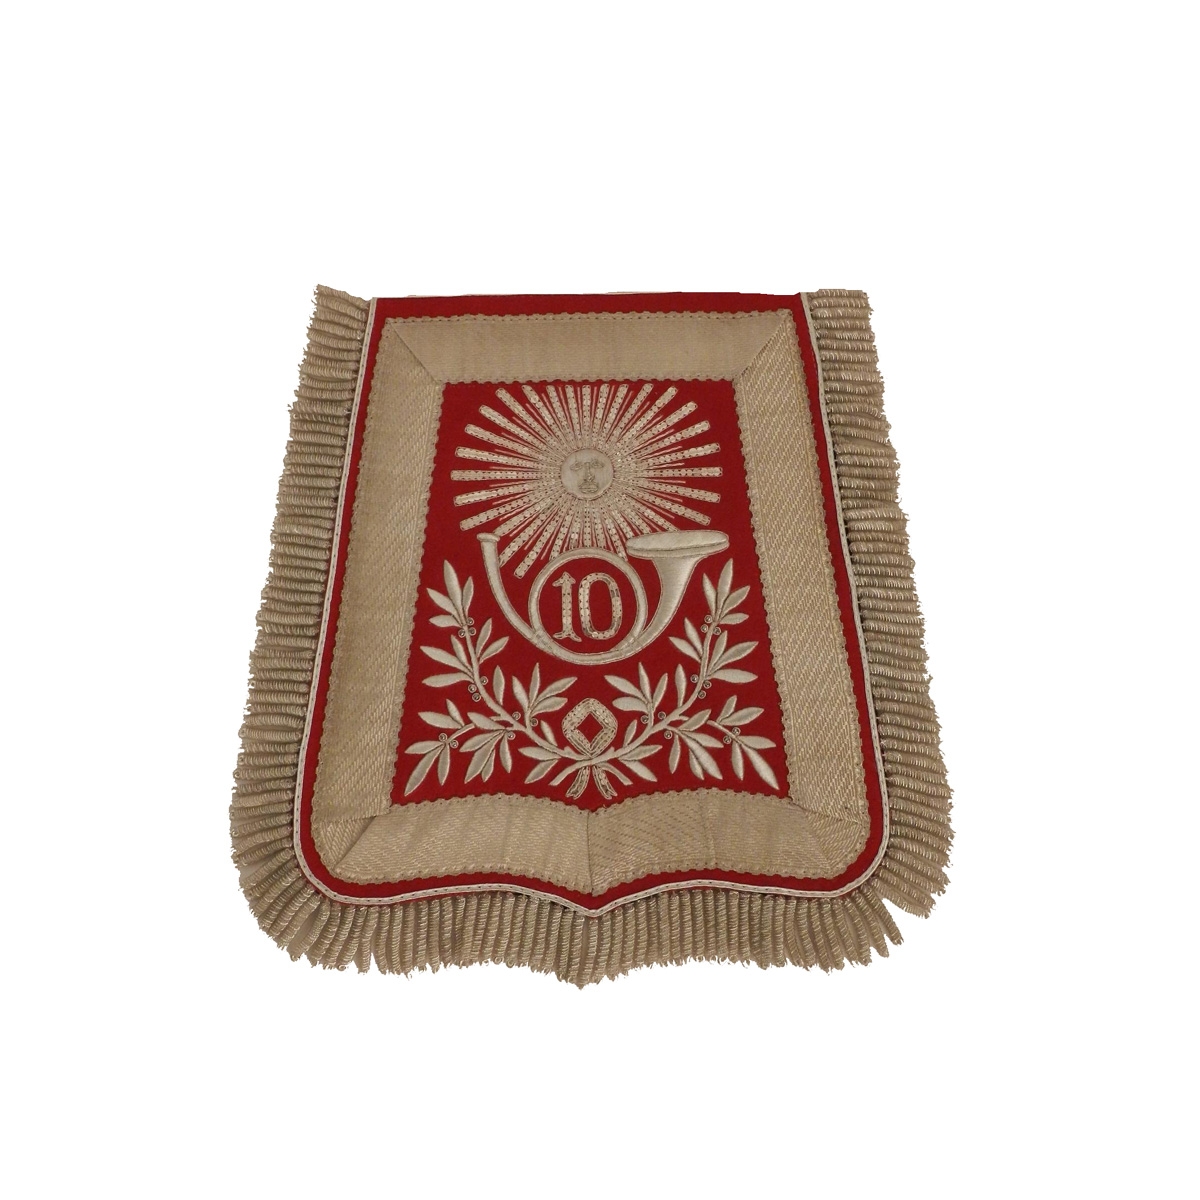 Captain Hirn, 10 th regiment of casseur a cheval, sabretache flag nice quality Hand Embroidery Gold 